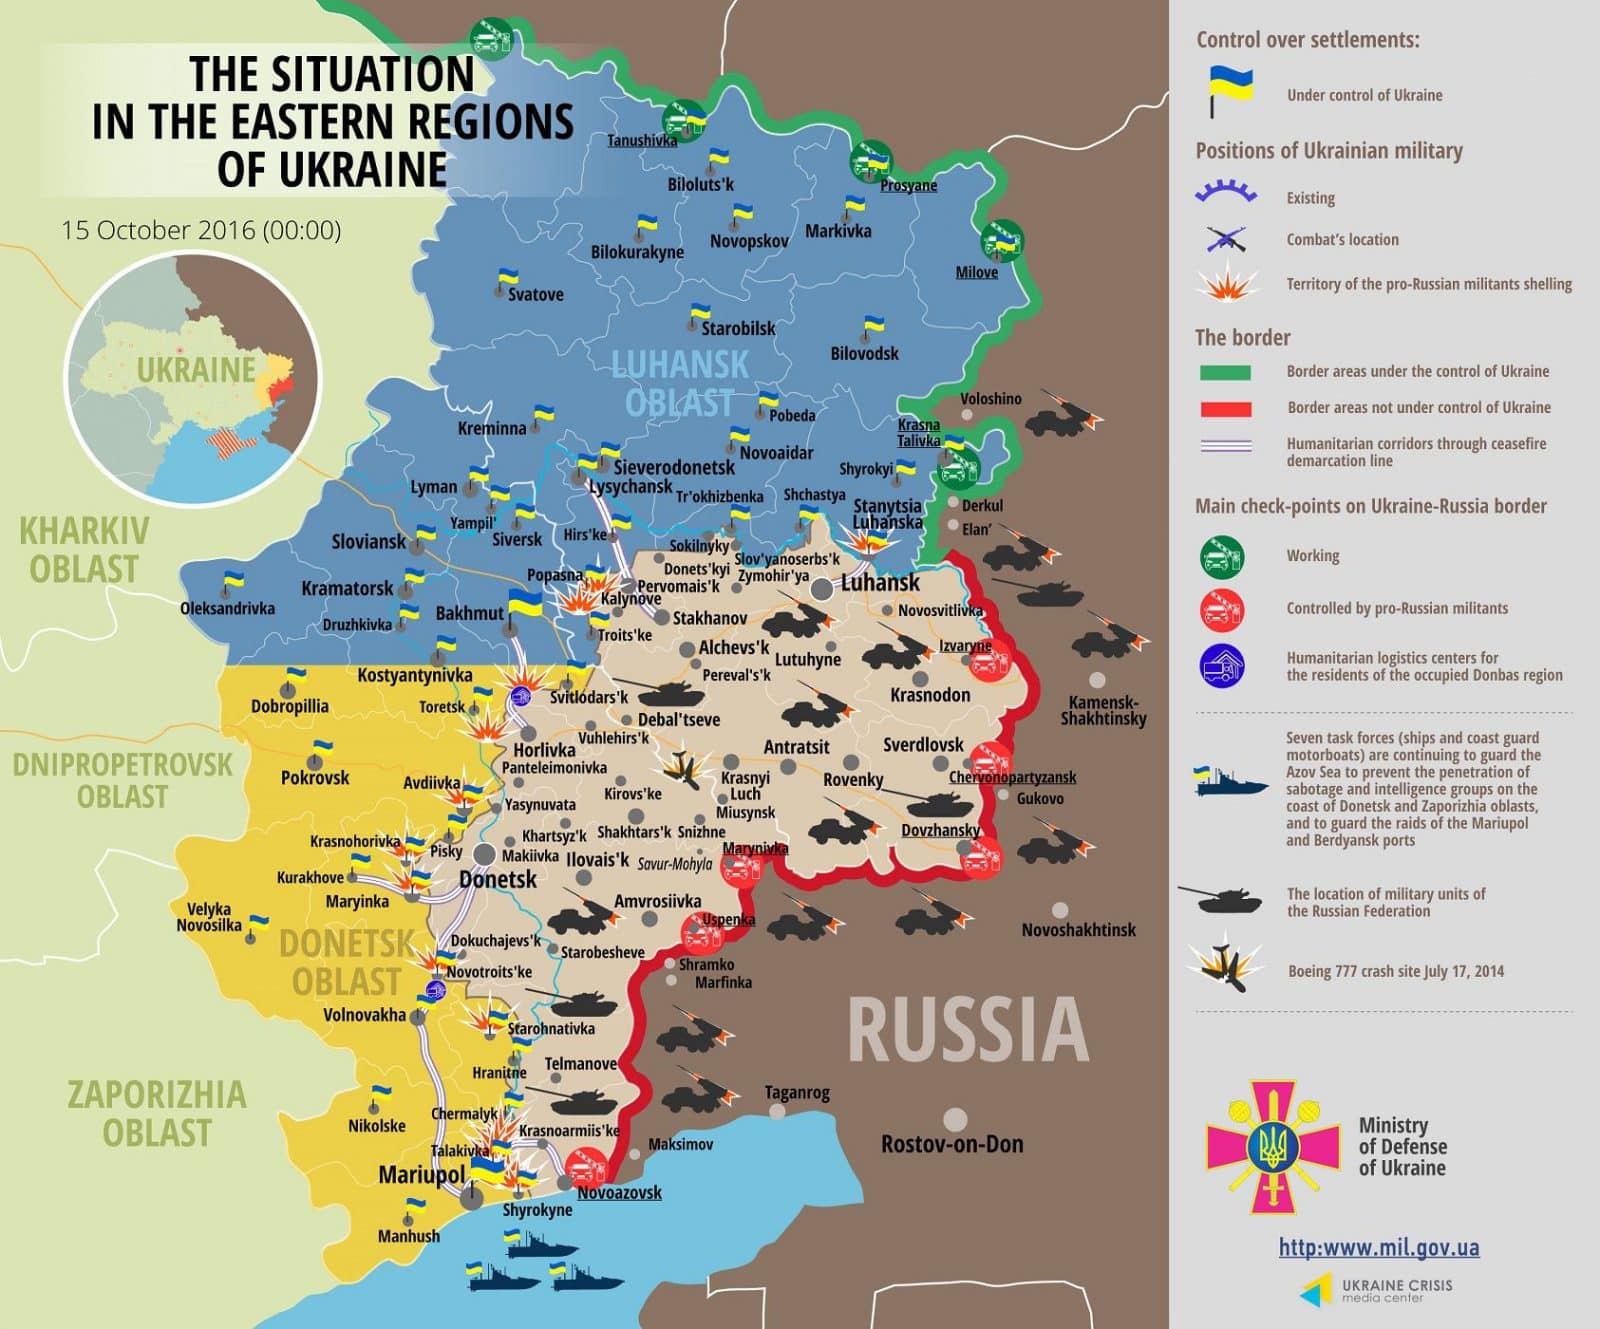 Russian militants attack Ukraine 42 times in last day, continue using heavy weapons